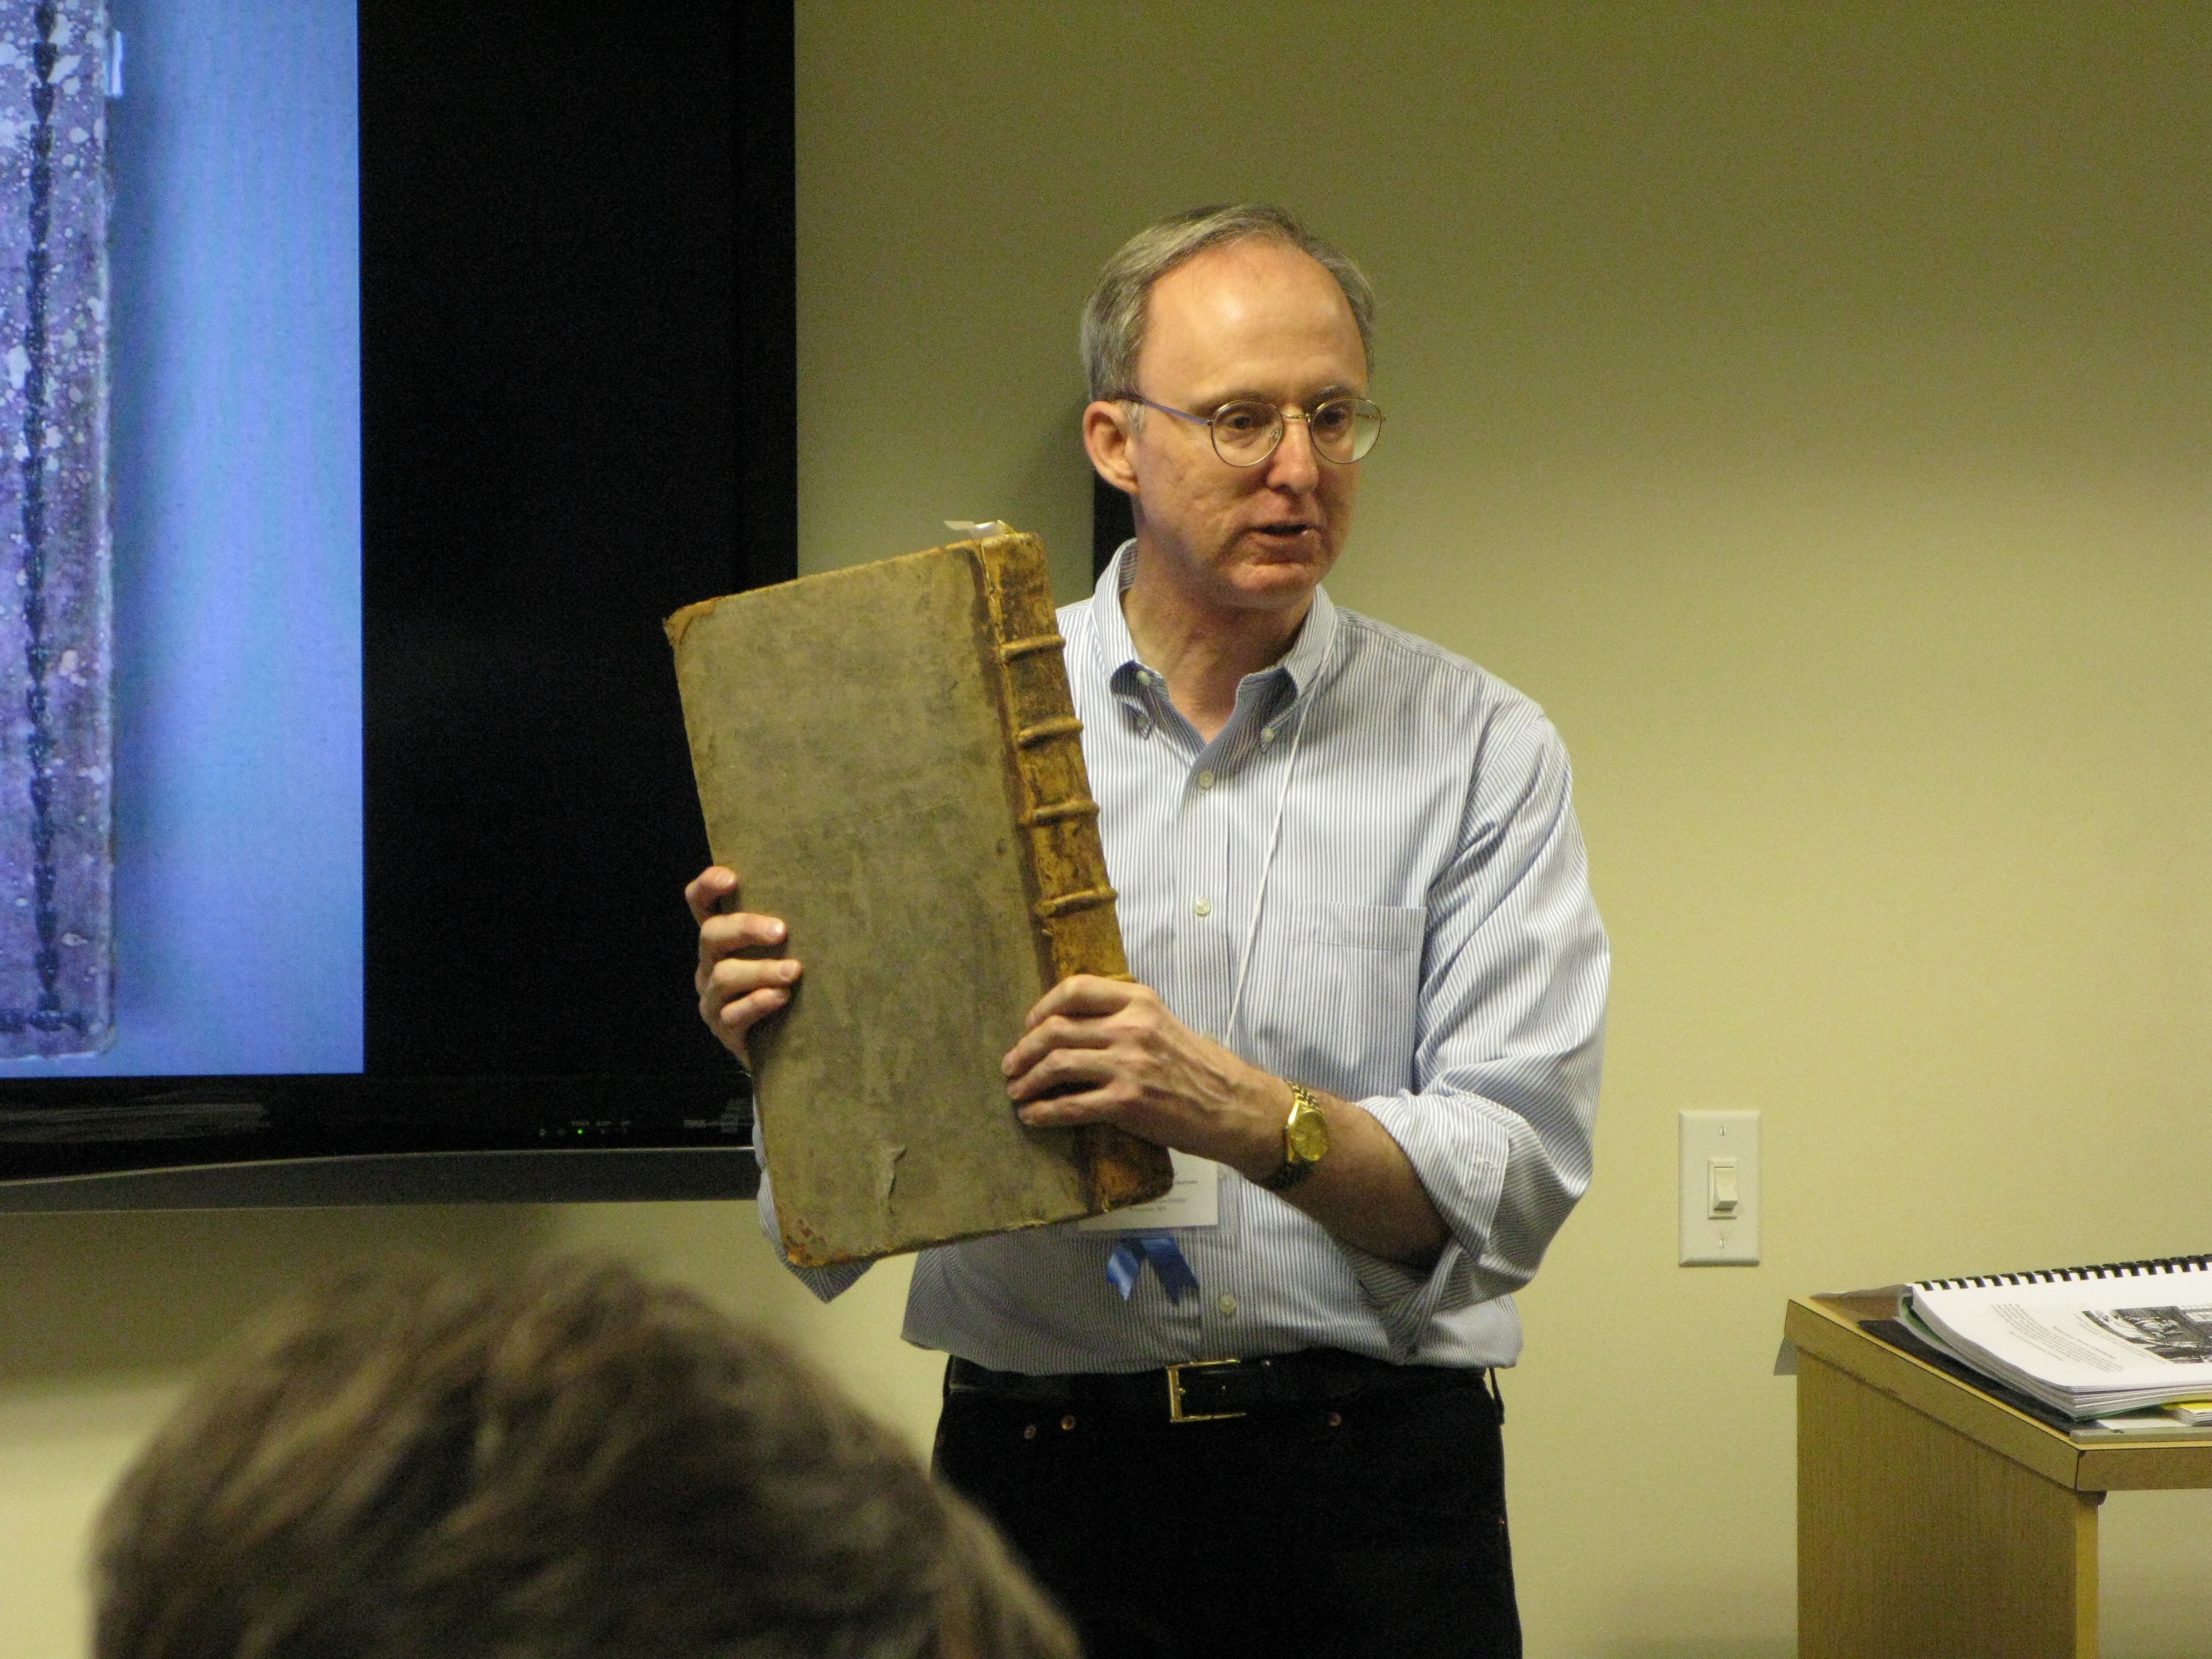 David Whitesell holding a big old book while talking to a group of people